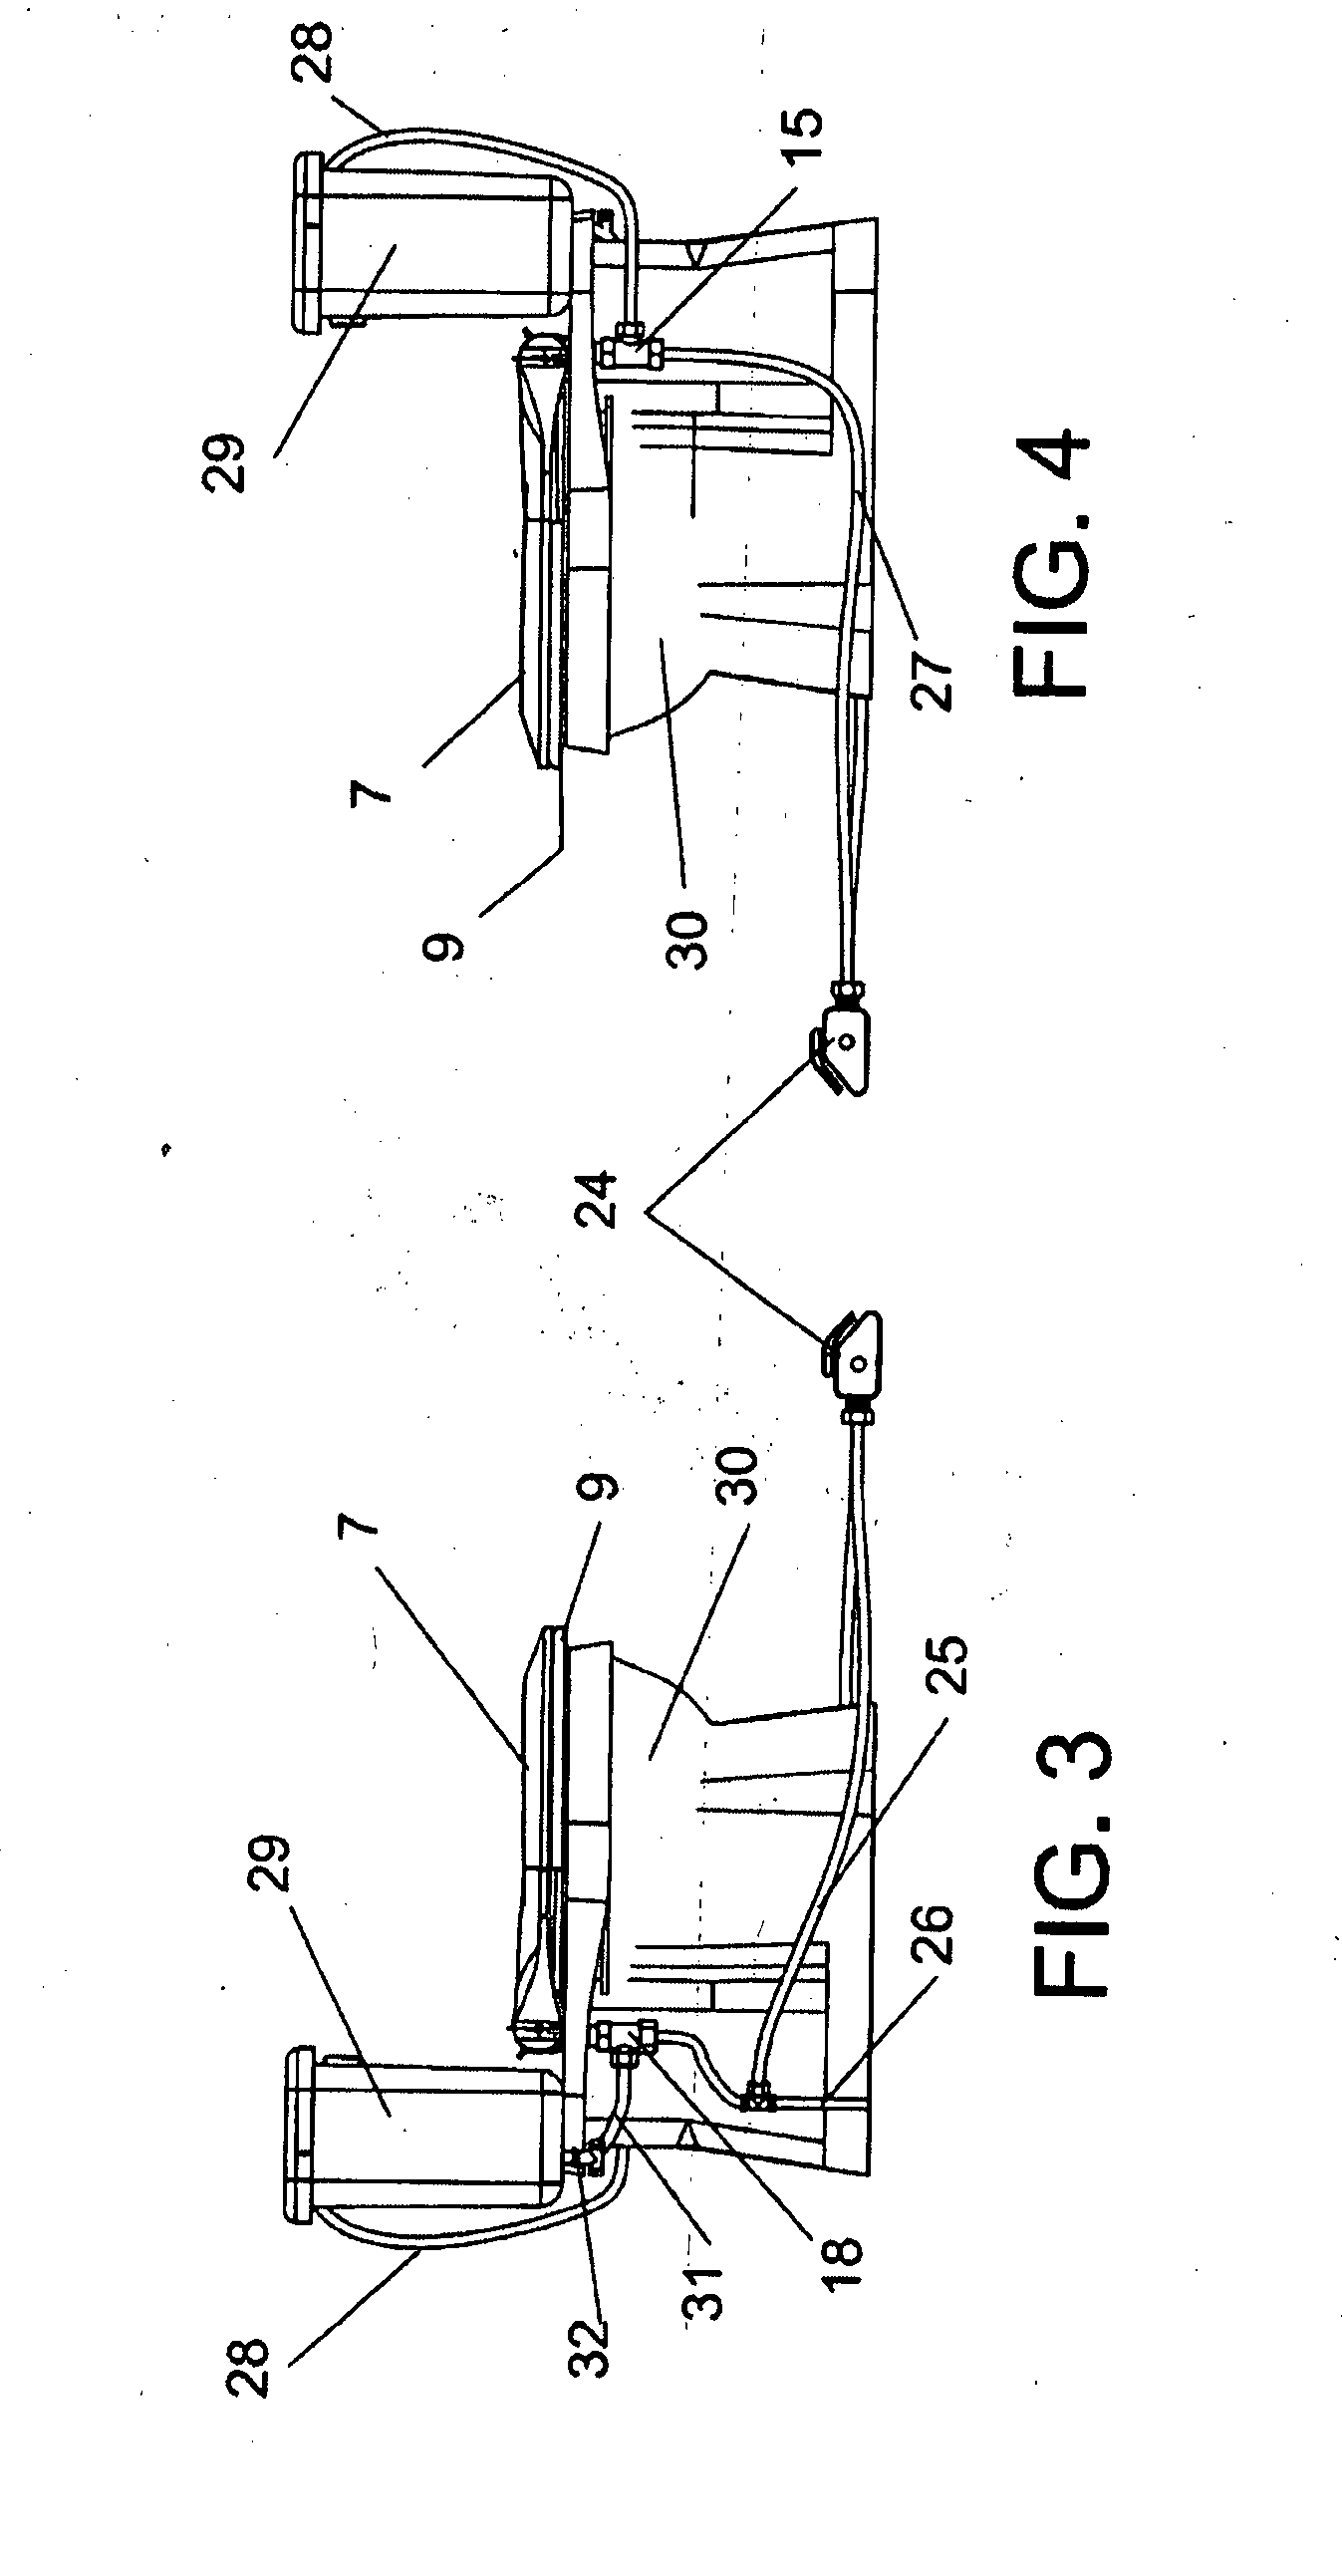 Device comprising actuating mechanisms for lifting and lowering the cover and the seat of a wc, independently from each other or simultaneously